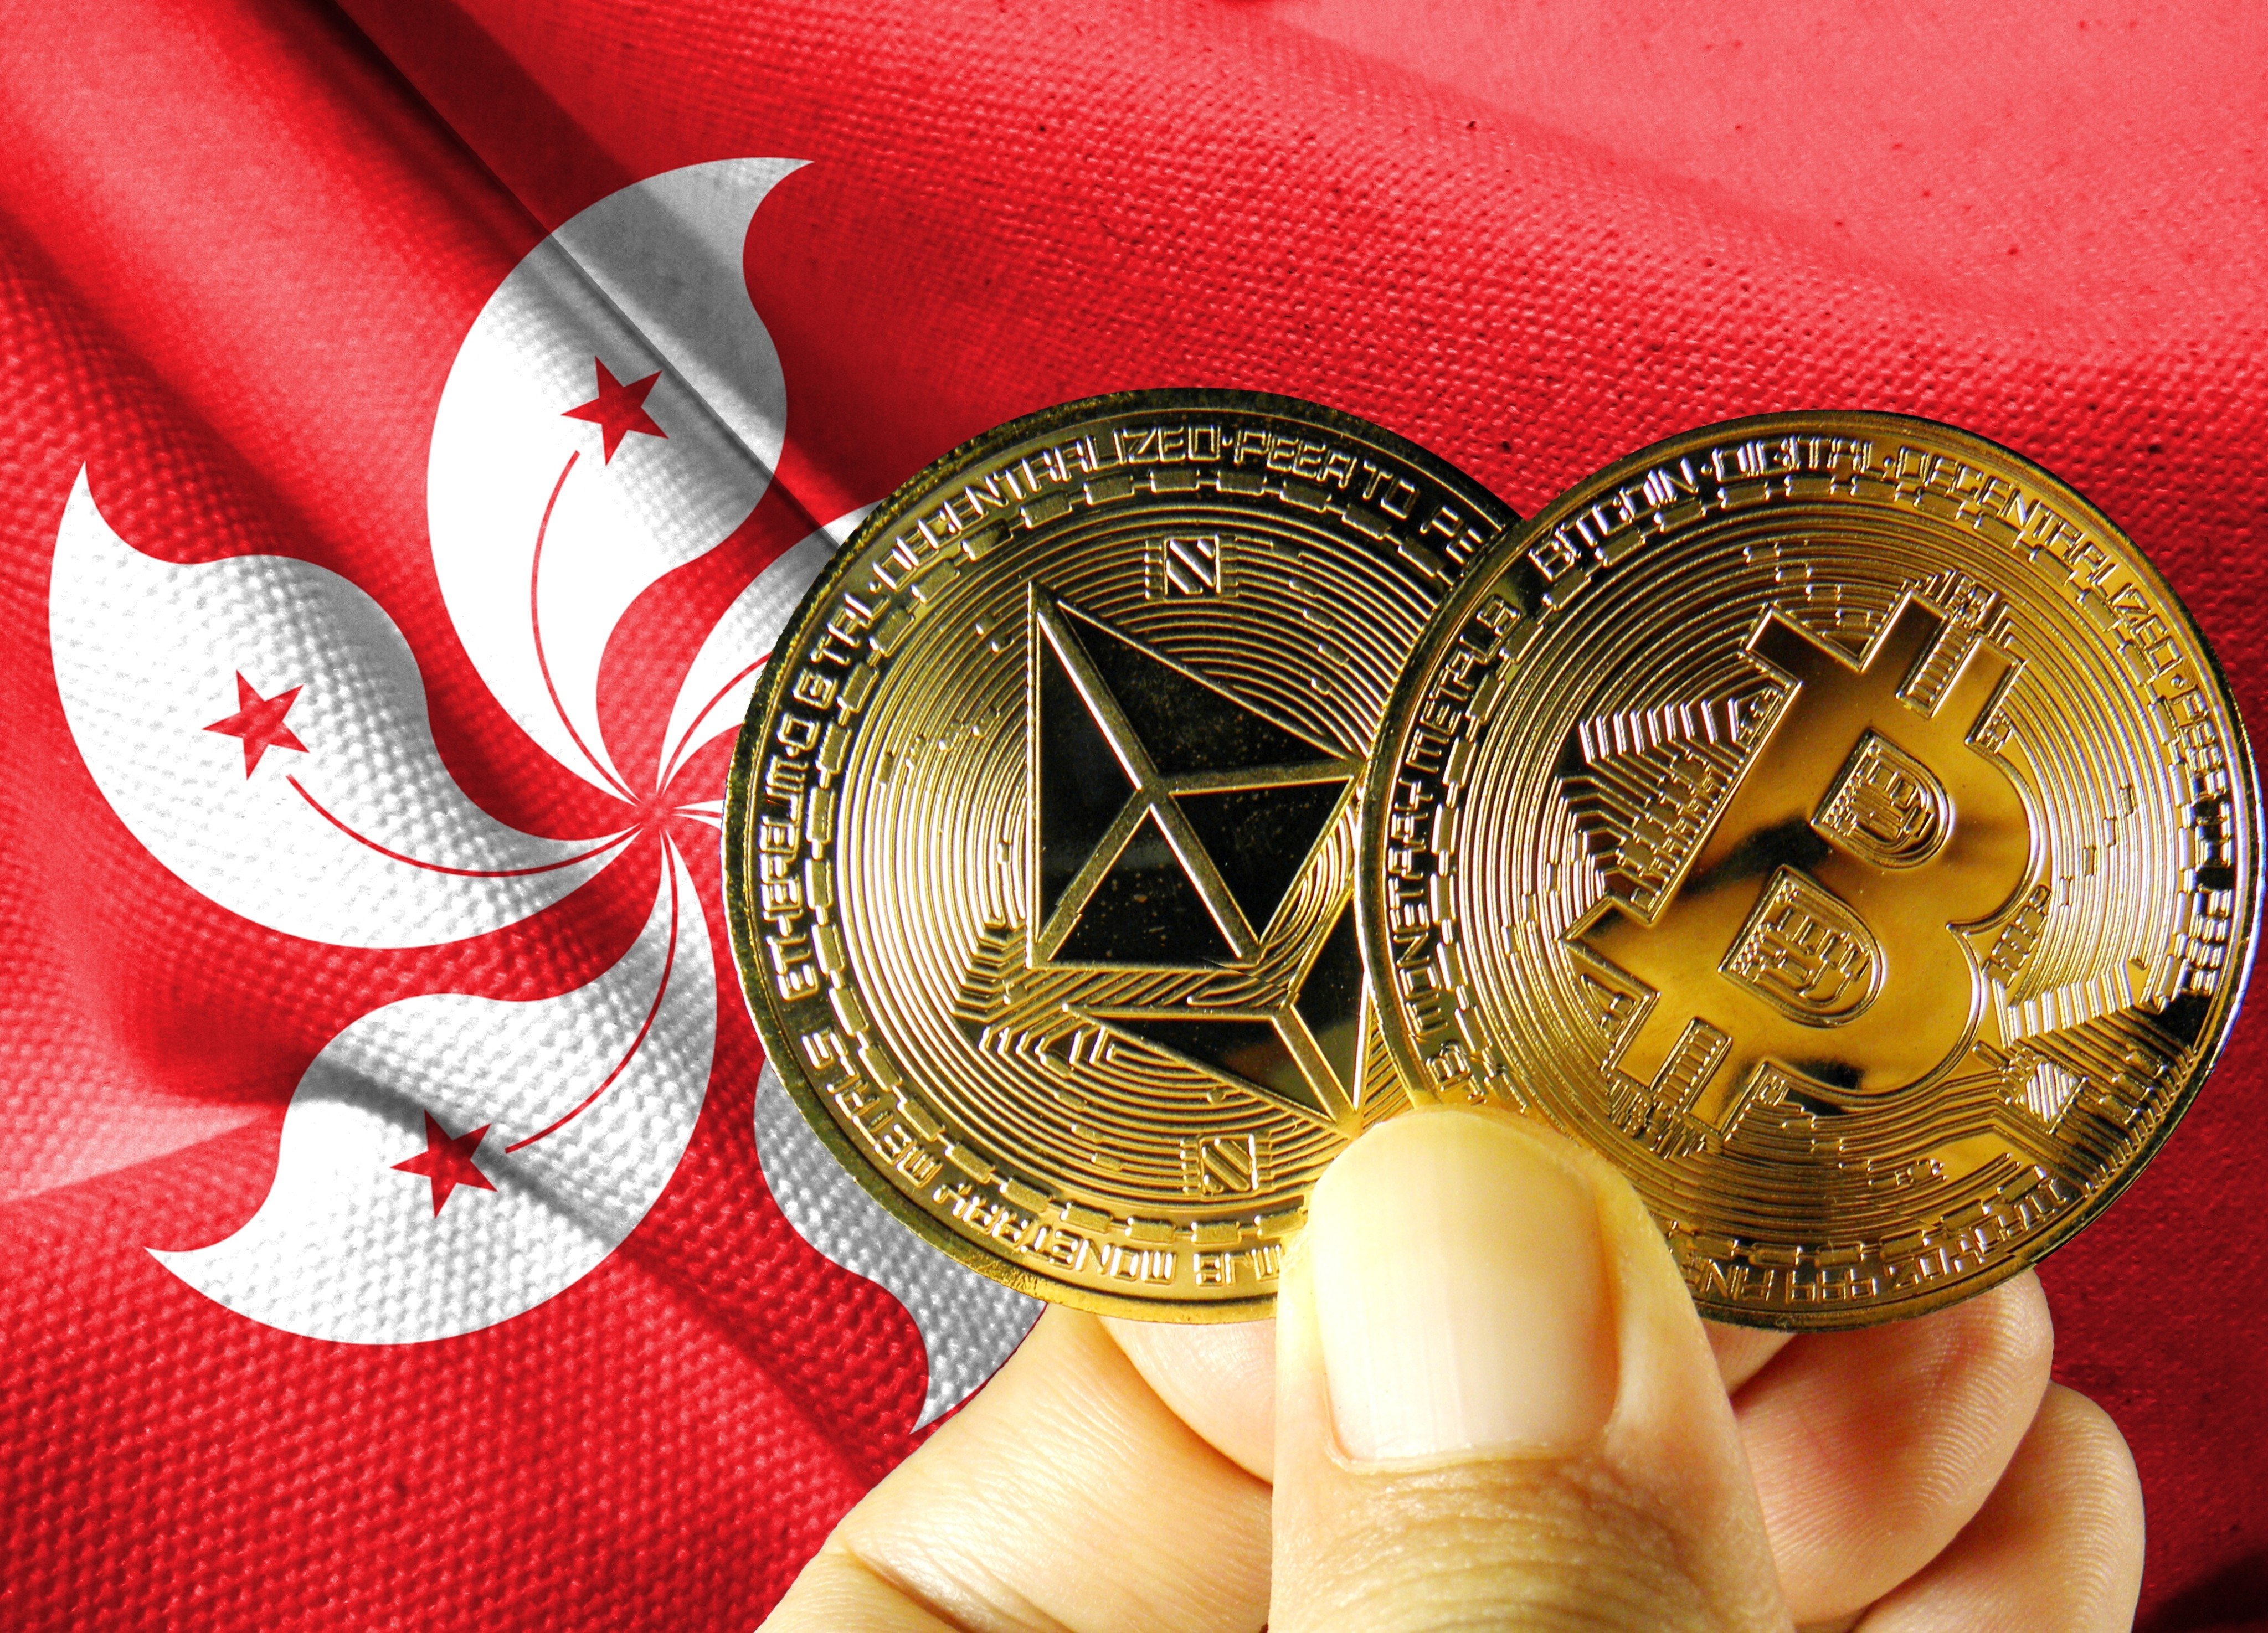 The Hong Kong government has been pushing to become a cryptocurrency hub on par with the likes of Singapore or Dubai. Photo: Shutterstock